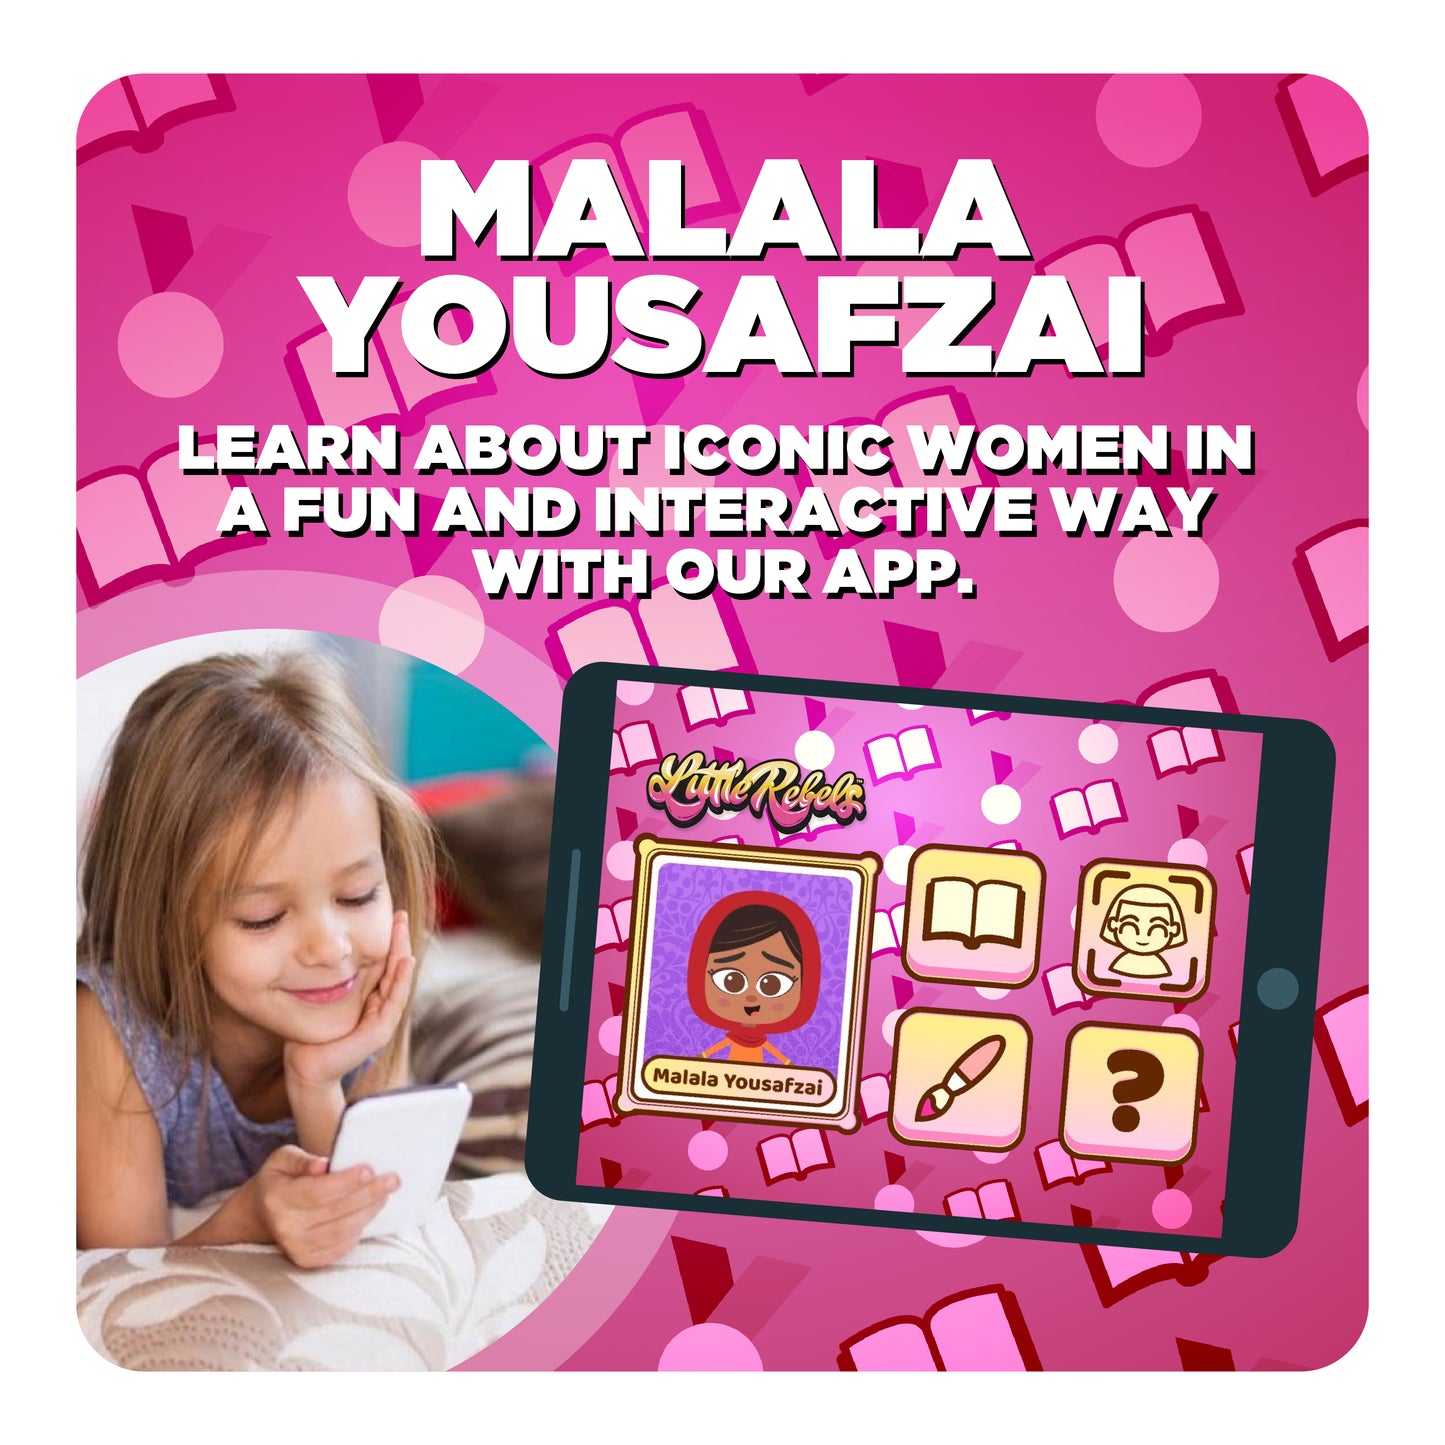 Empower Your Child's Education with the Malala Yousafzai Interactive Plush: A Toy That Inspires Learning and Courage!